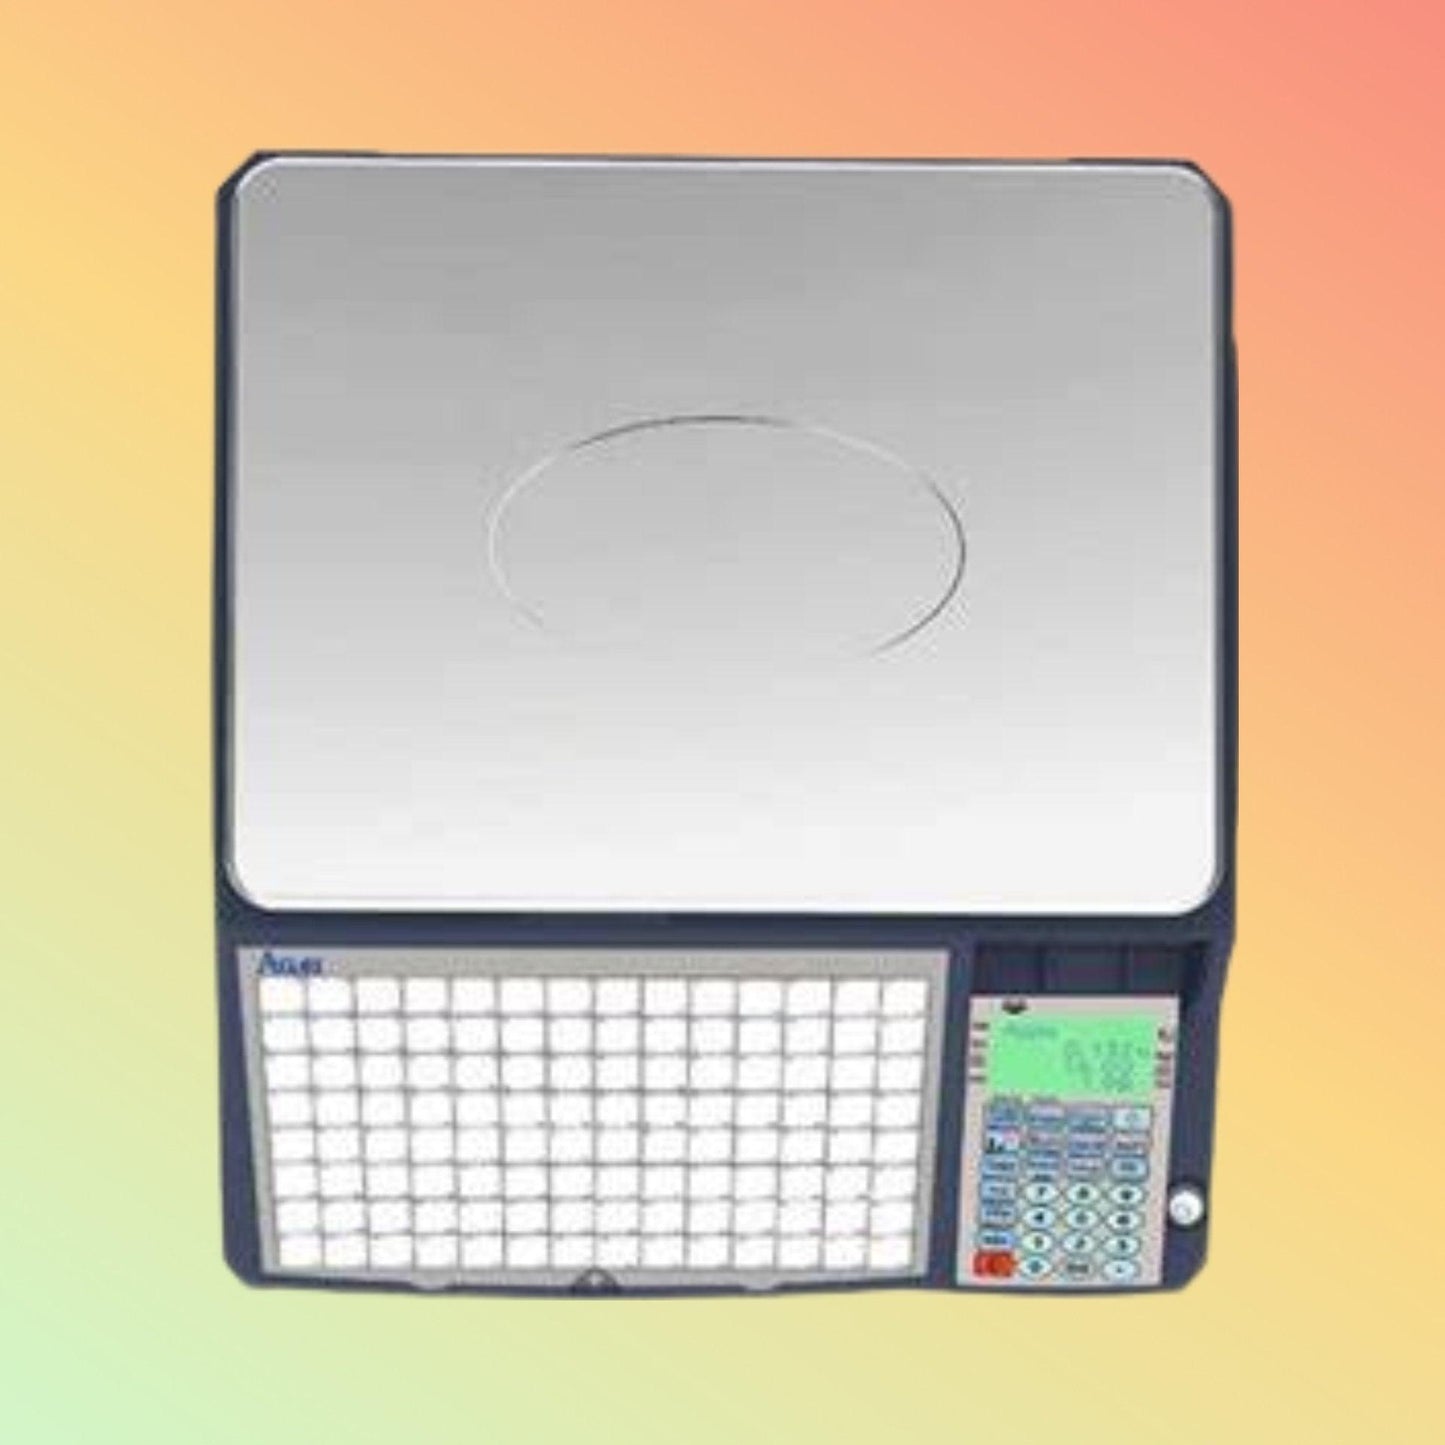 Weighing Scale - Aclas LS6X - NEOTECH